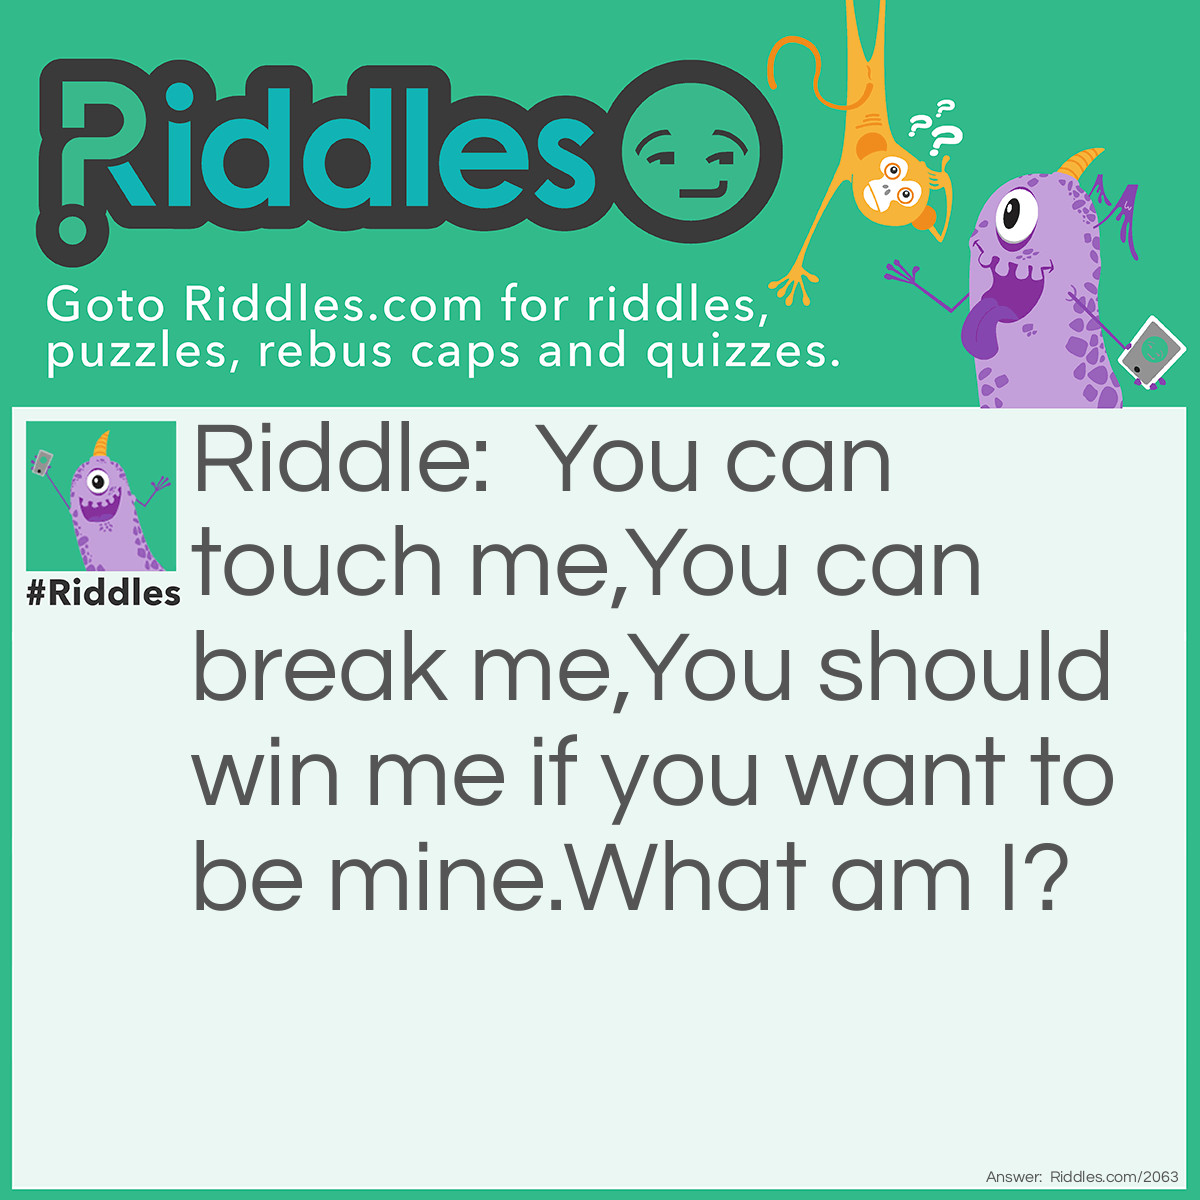 Riddle: You can touch me,
You can break me,
You should win me if you want to be mine.
<a title="What Am I Riddles" href="https://www.riddles.com/what-am-i-riddles">What am I</a>? Answer: A heart.